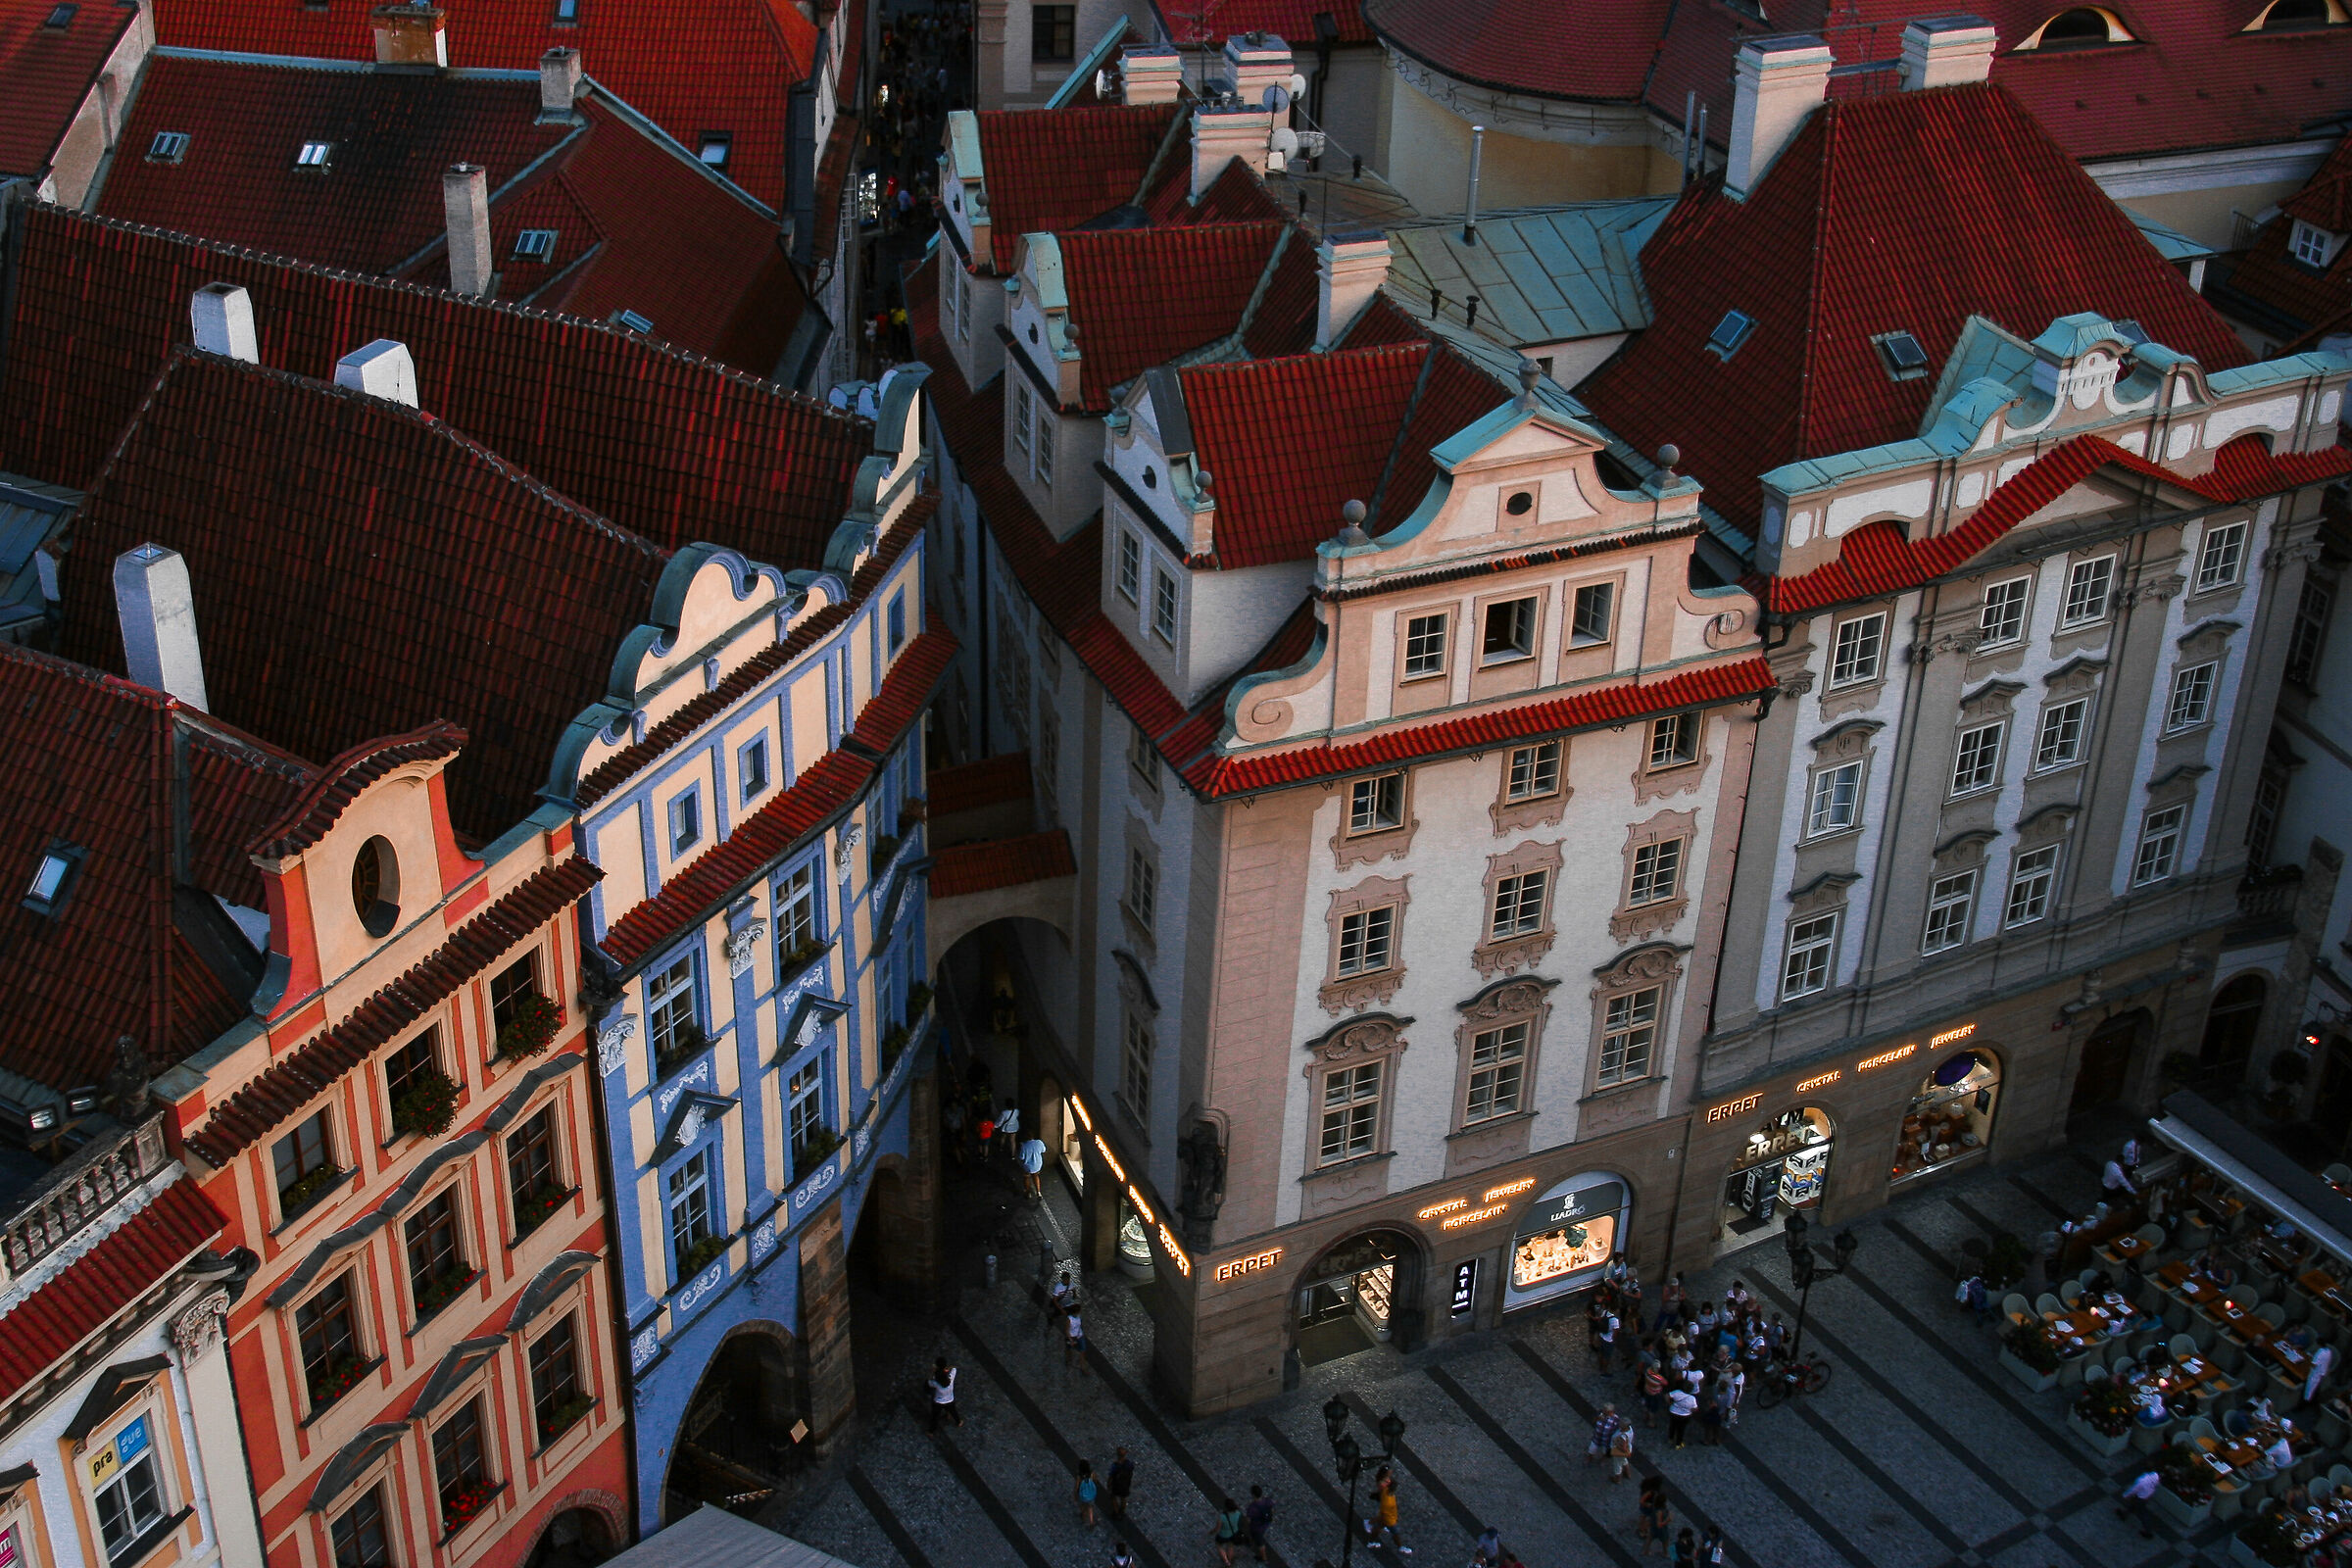 Prague immersed in its colors...